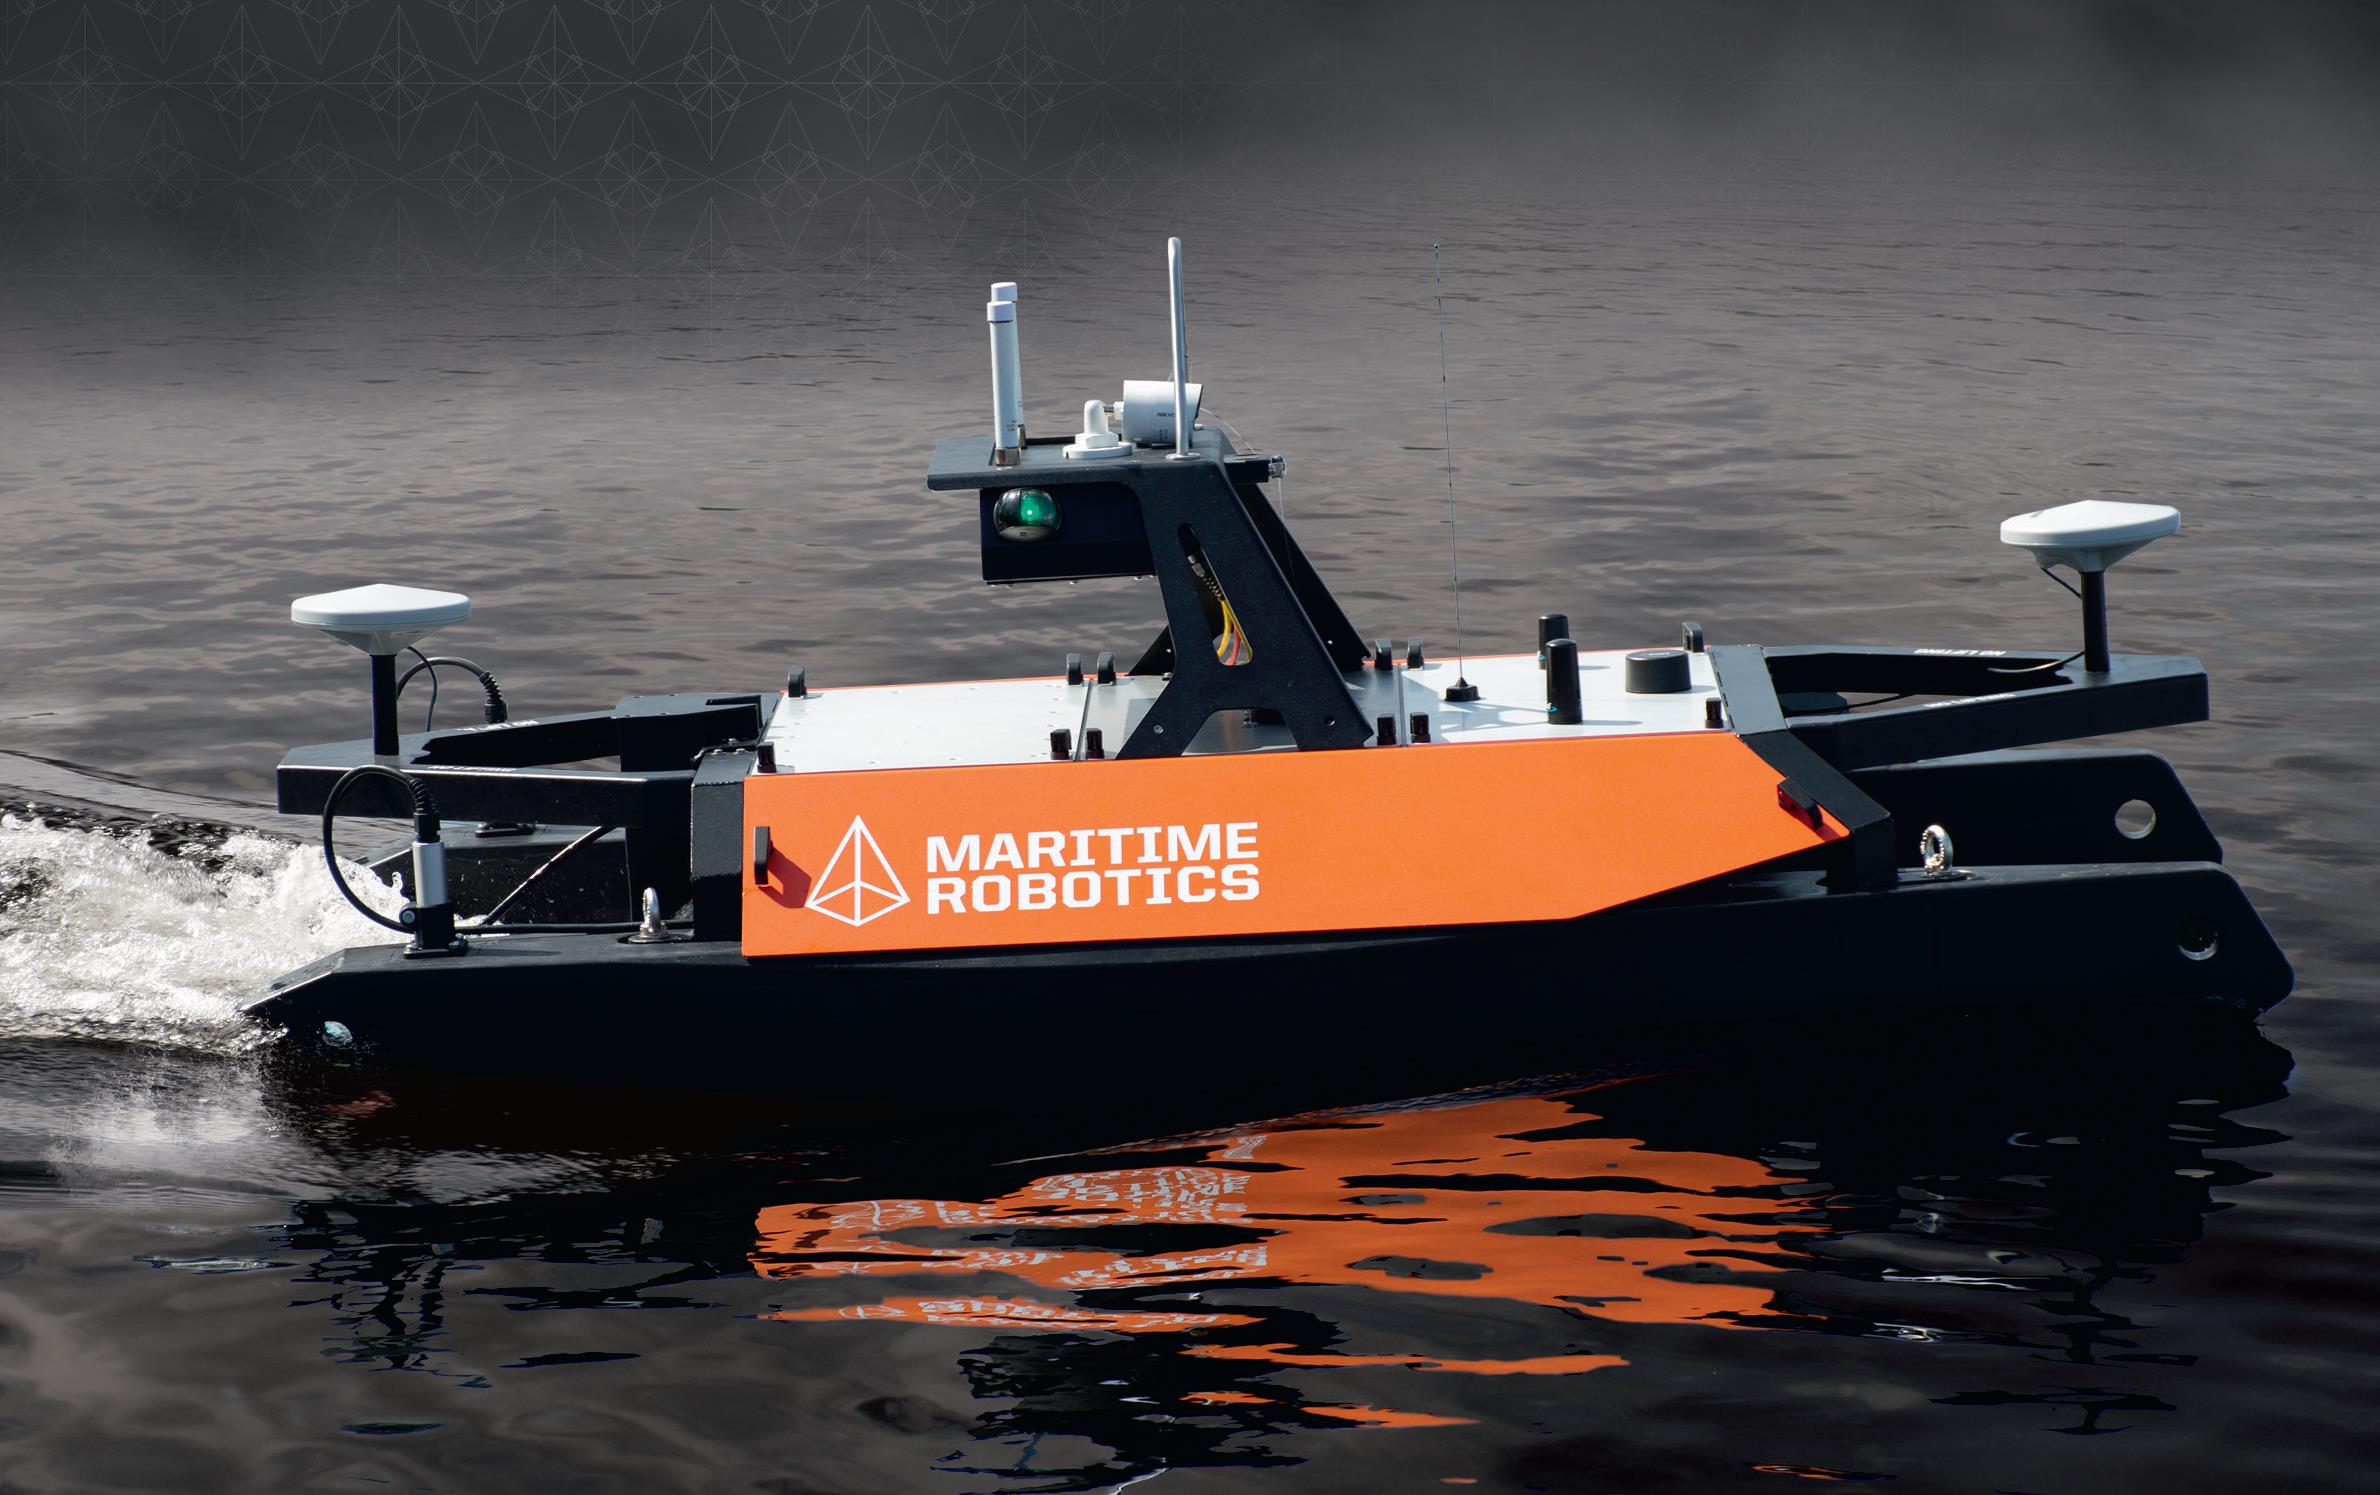 Picture of the Otter (Maritime Robotics) a black and orange catamaran, with an electric motor, with antennas in the bow, aft and on the roof.